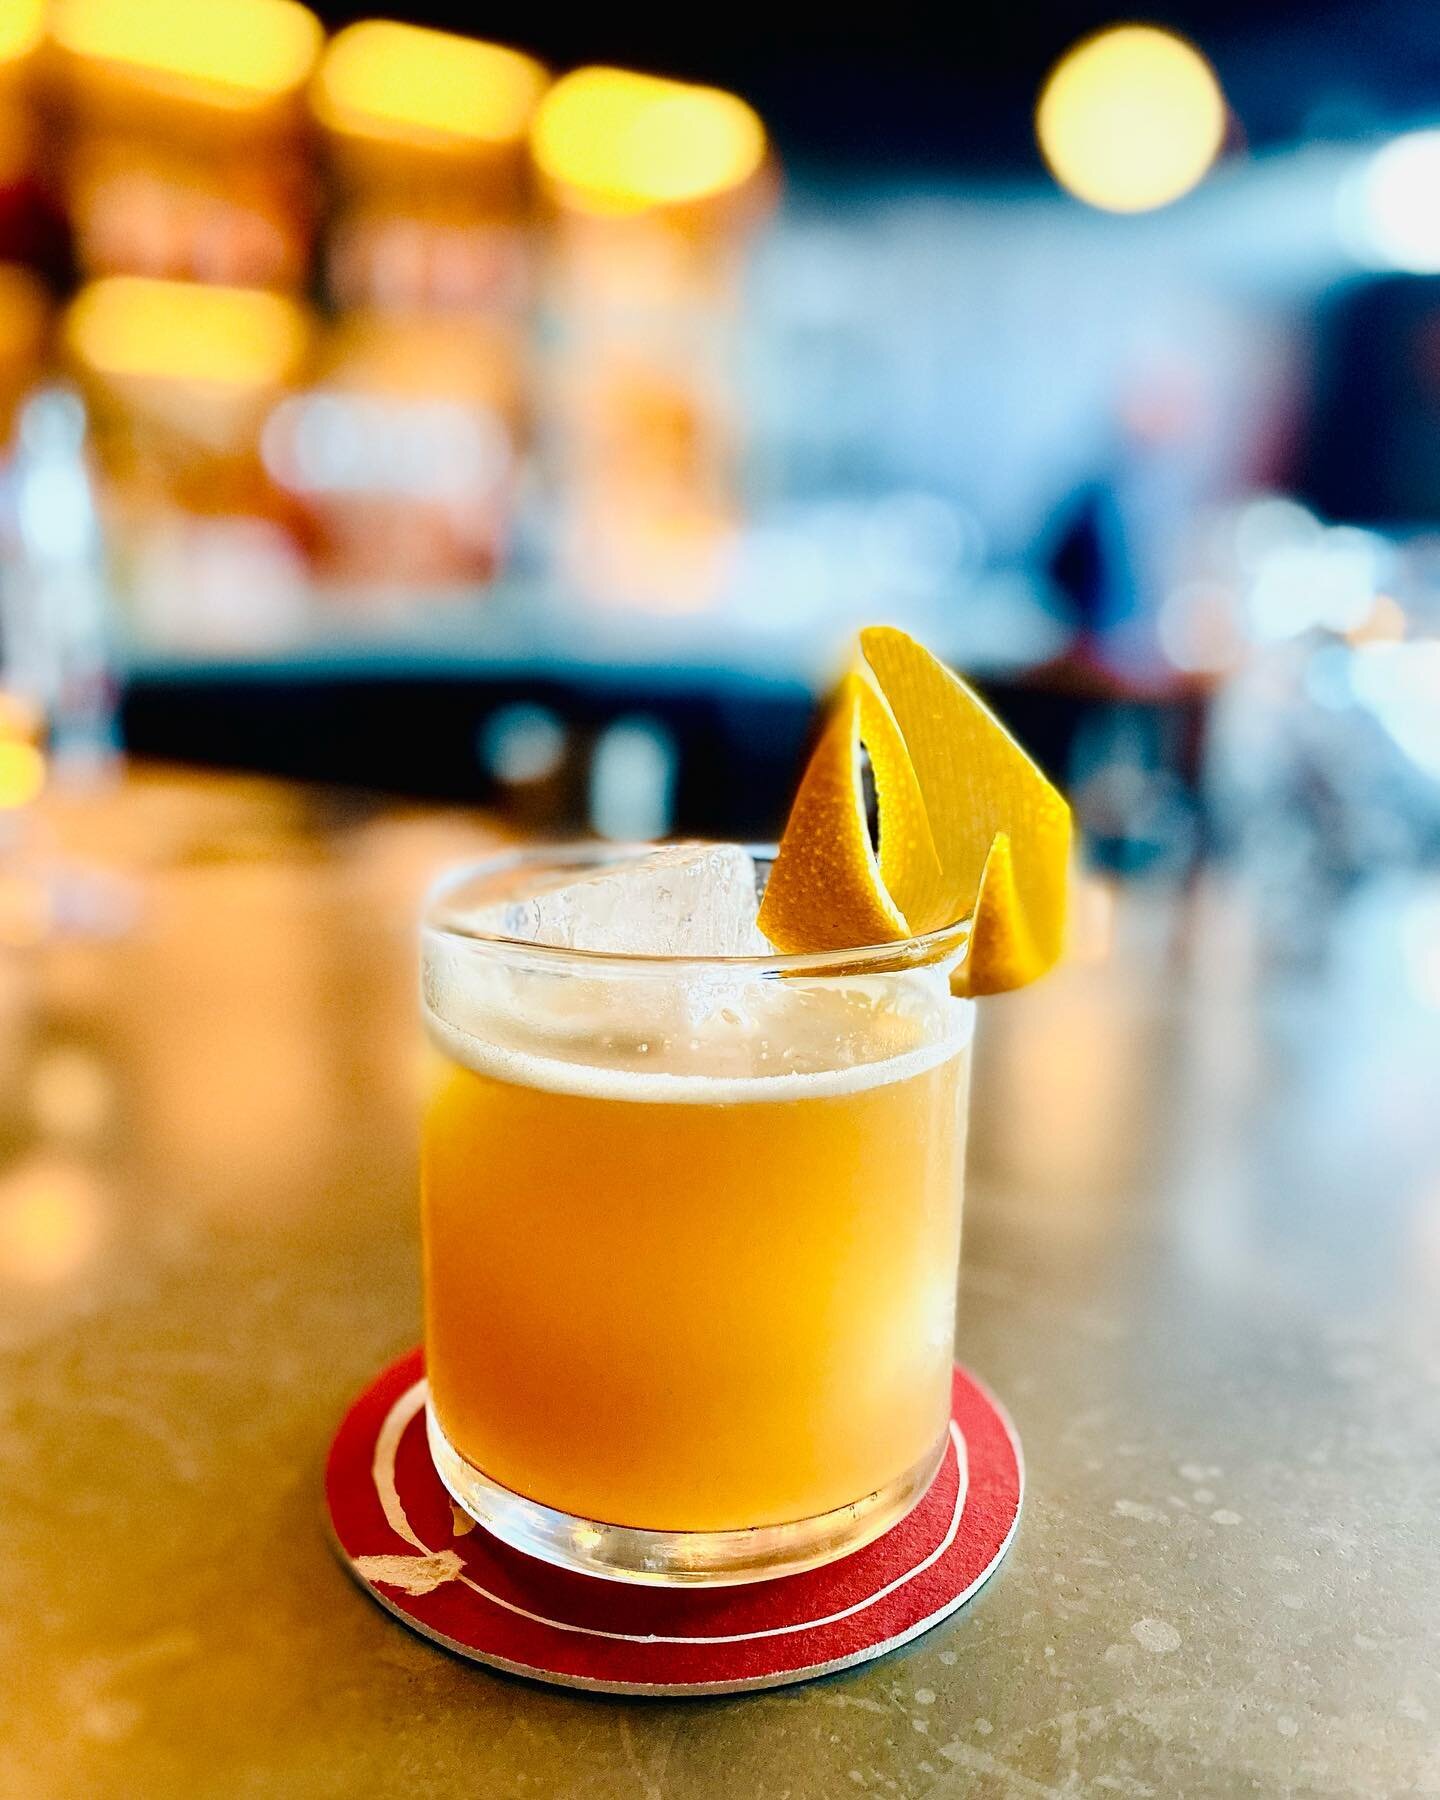 There is something so enchanting about the classic #sidecar cocktail ✨

The way the brandy, lemon juice, and orange liqueur blend together makes this the perfect #cocktail to enjoy on #NationalBeverageDay 🍸🍊🍋 

#beverages #cheers #chasecenter #tas